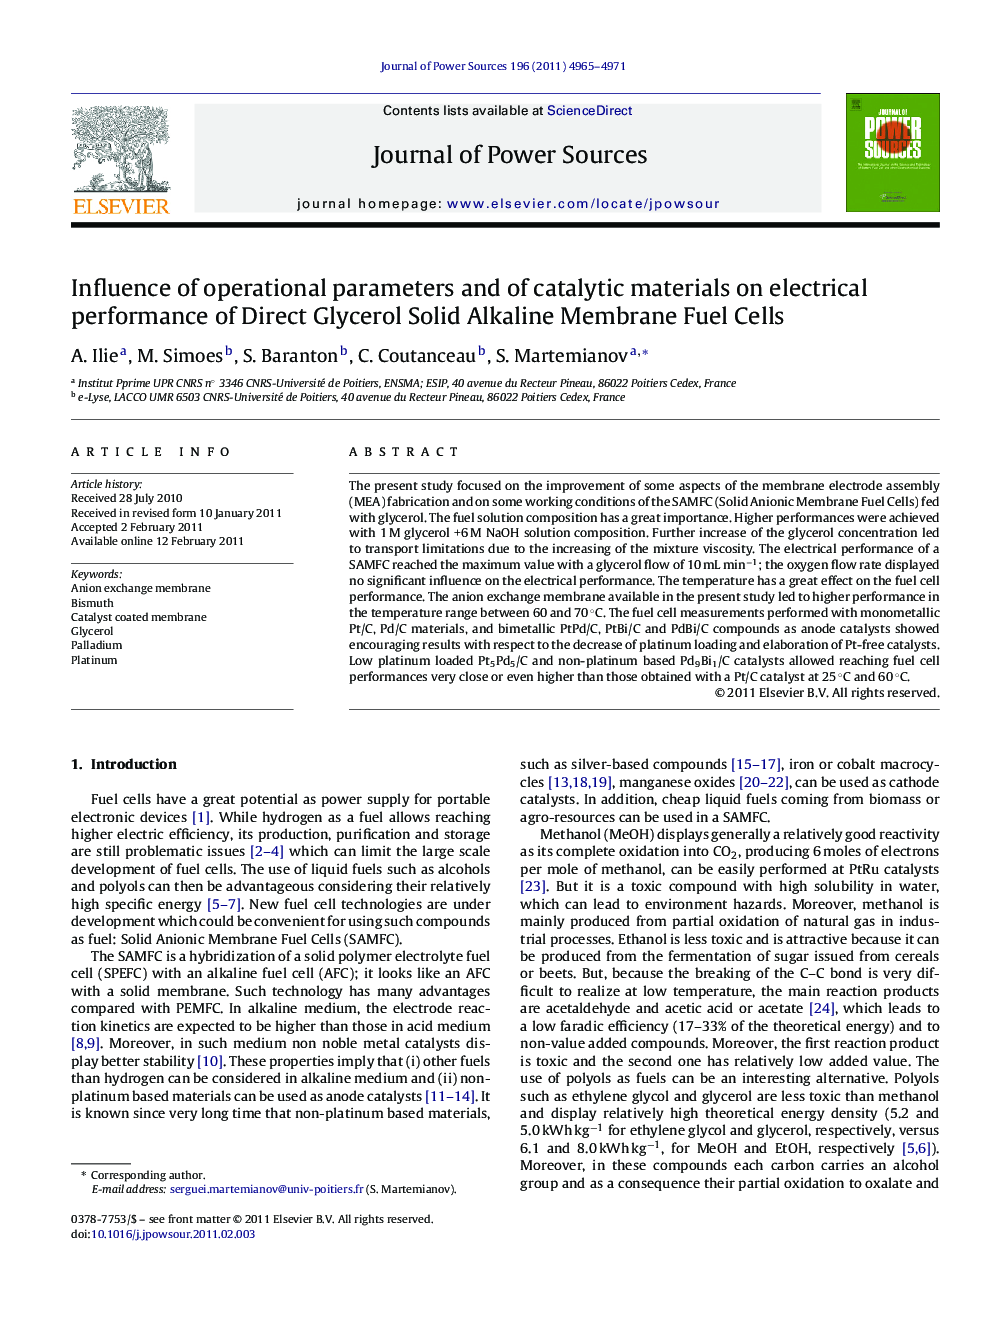 Influence of operational parameters and of catalytic materials on electrical performance of Direct Glycerol Solid Alkaline Membrane Fuel Cells